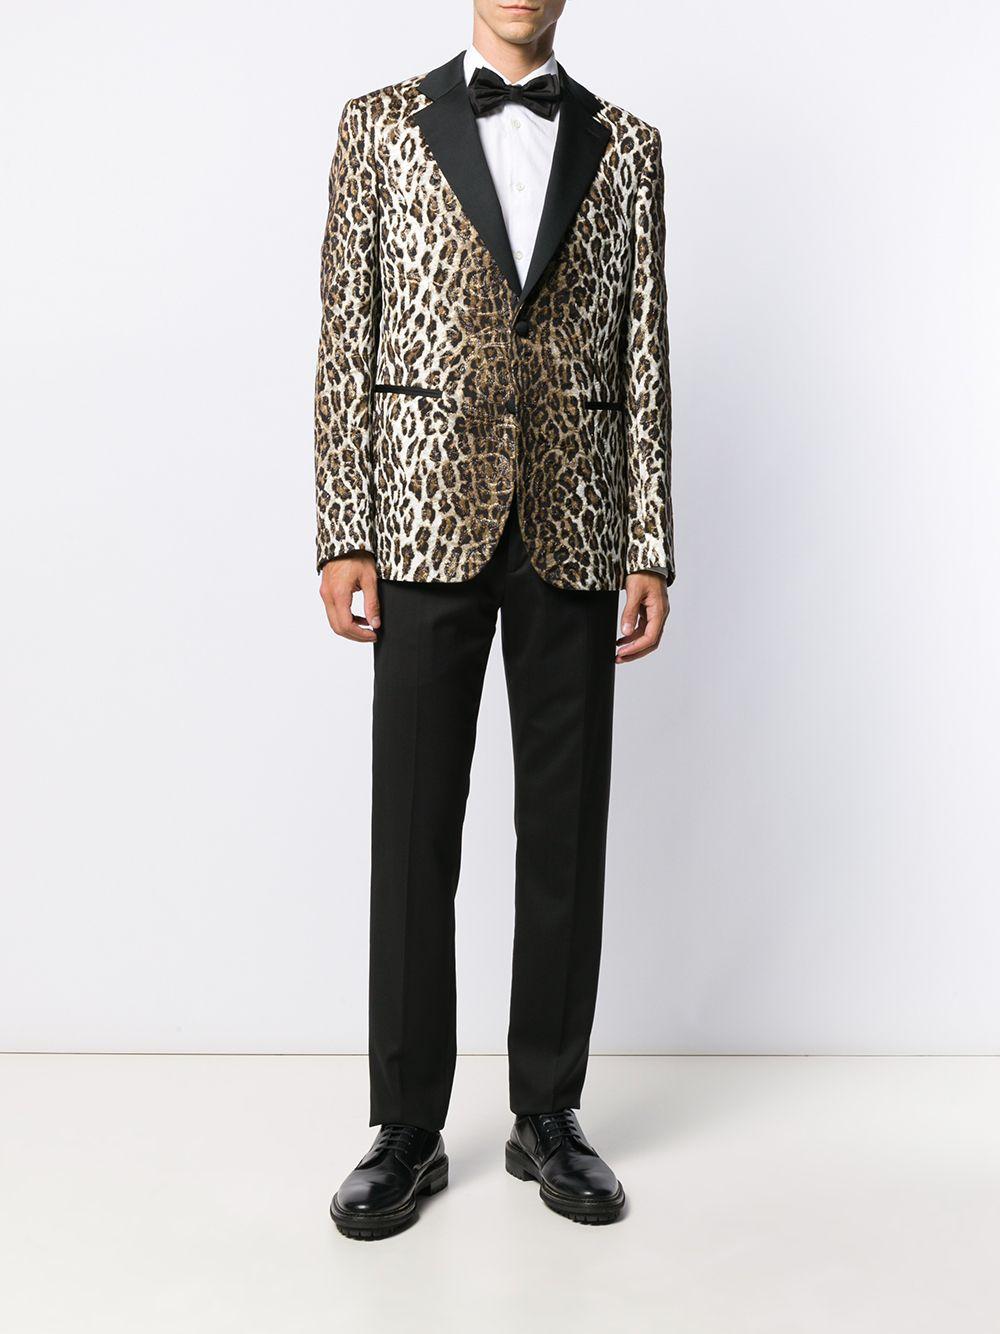 Versace FW19 Mens Jacquard Leopard Print Tuxedo Jacket / Blazer

Want to leave a lasting first impression? Just put on this jacquard leopard print blazer from Versace. Whoever you meet will never forget your daring choice of tailoring. Featuring a